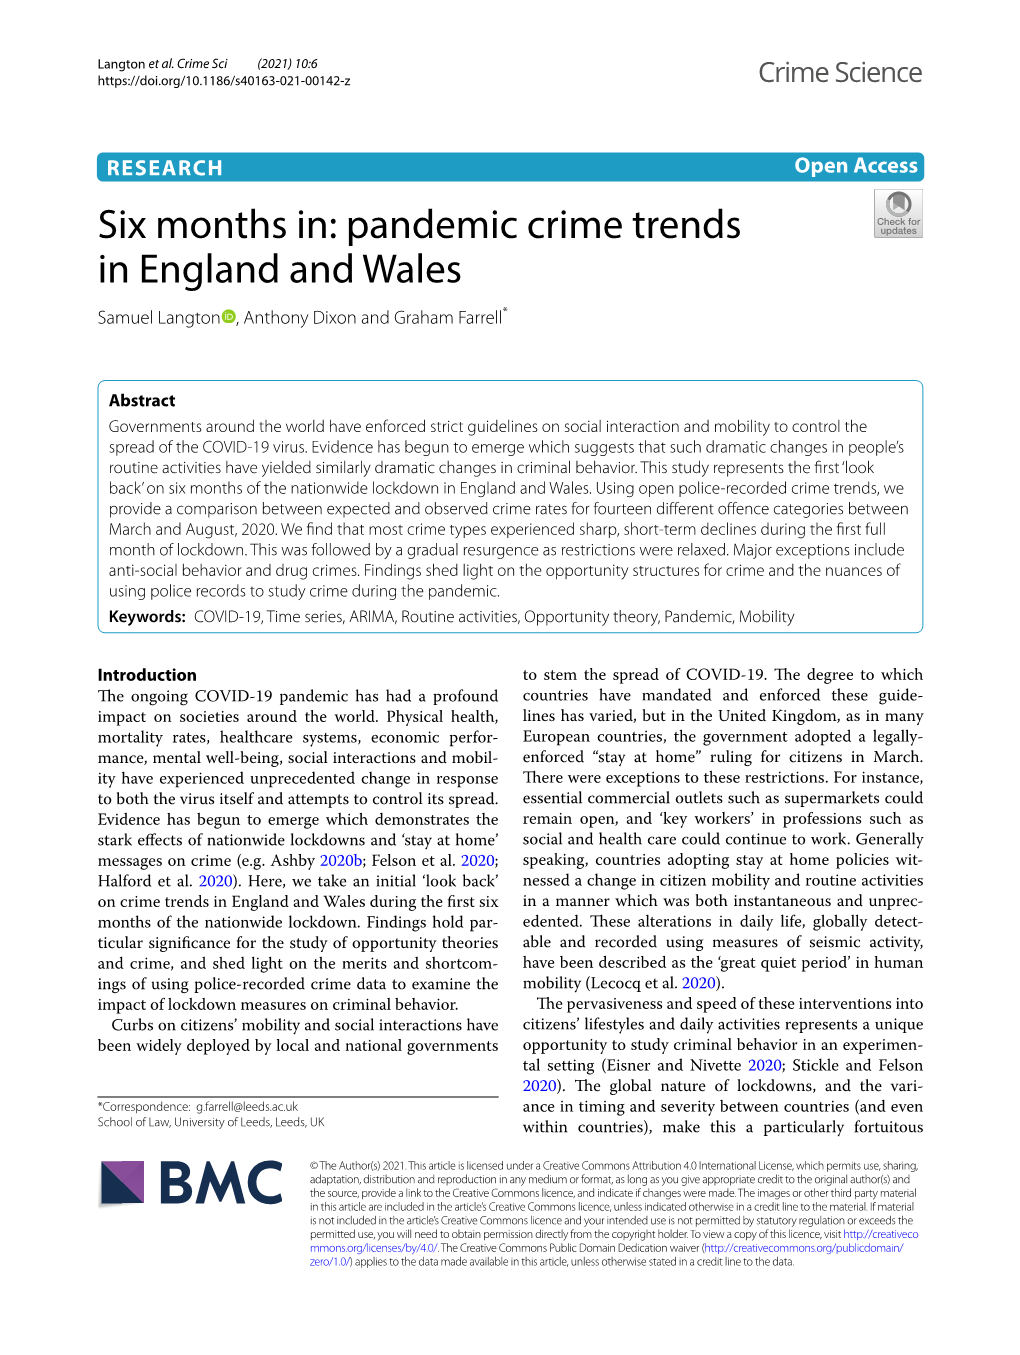 Six Months In: Pandemic Crime Trends in England and Wales Samuel Langton , Anthony Dixon and Graham Farrell*